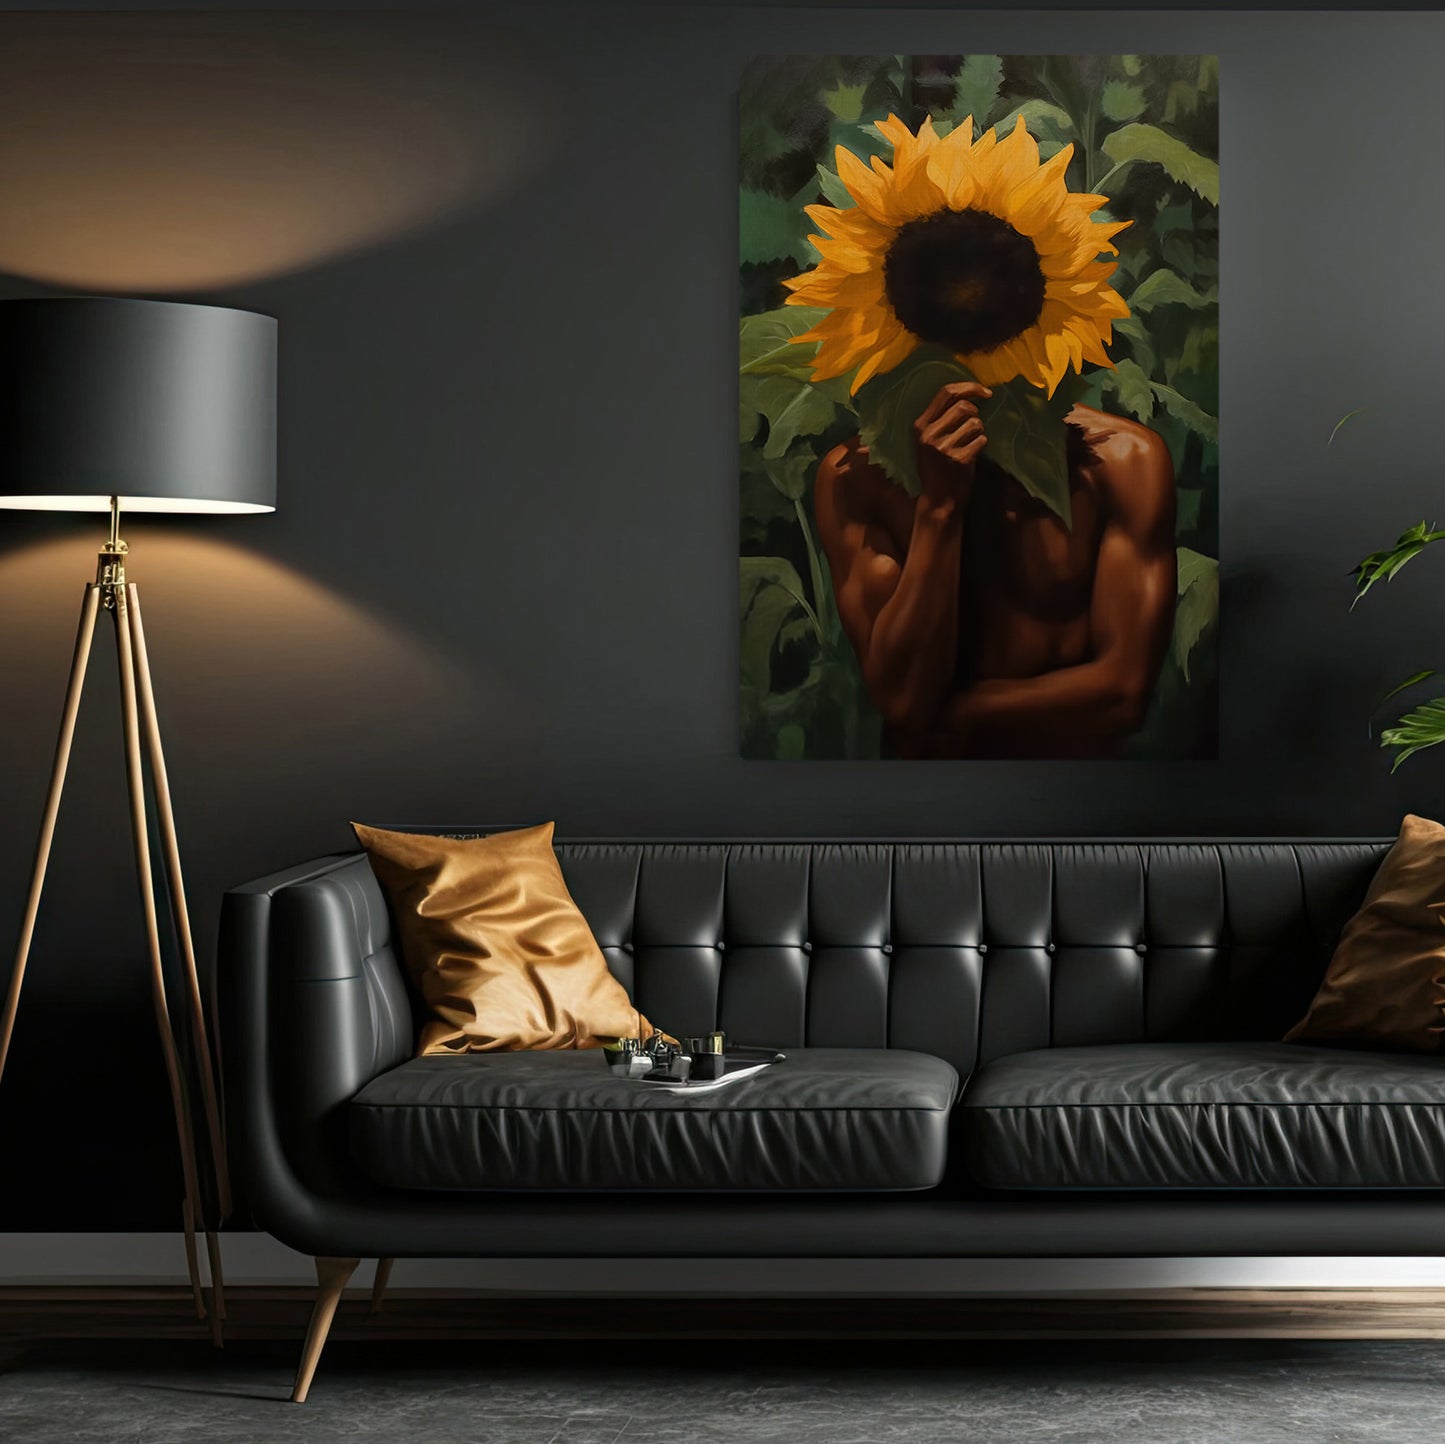 American Black Men With Sunflowers, Victorian Canvas Painting, Gothic Wall Art Decor - Modern Male Poster Gift